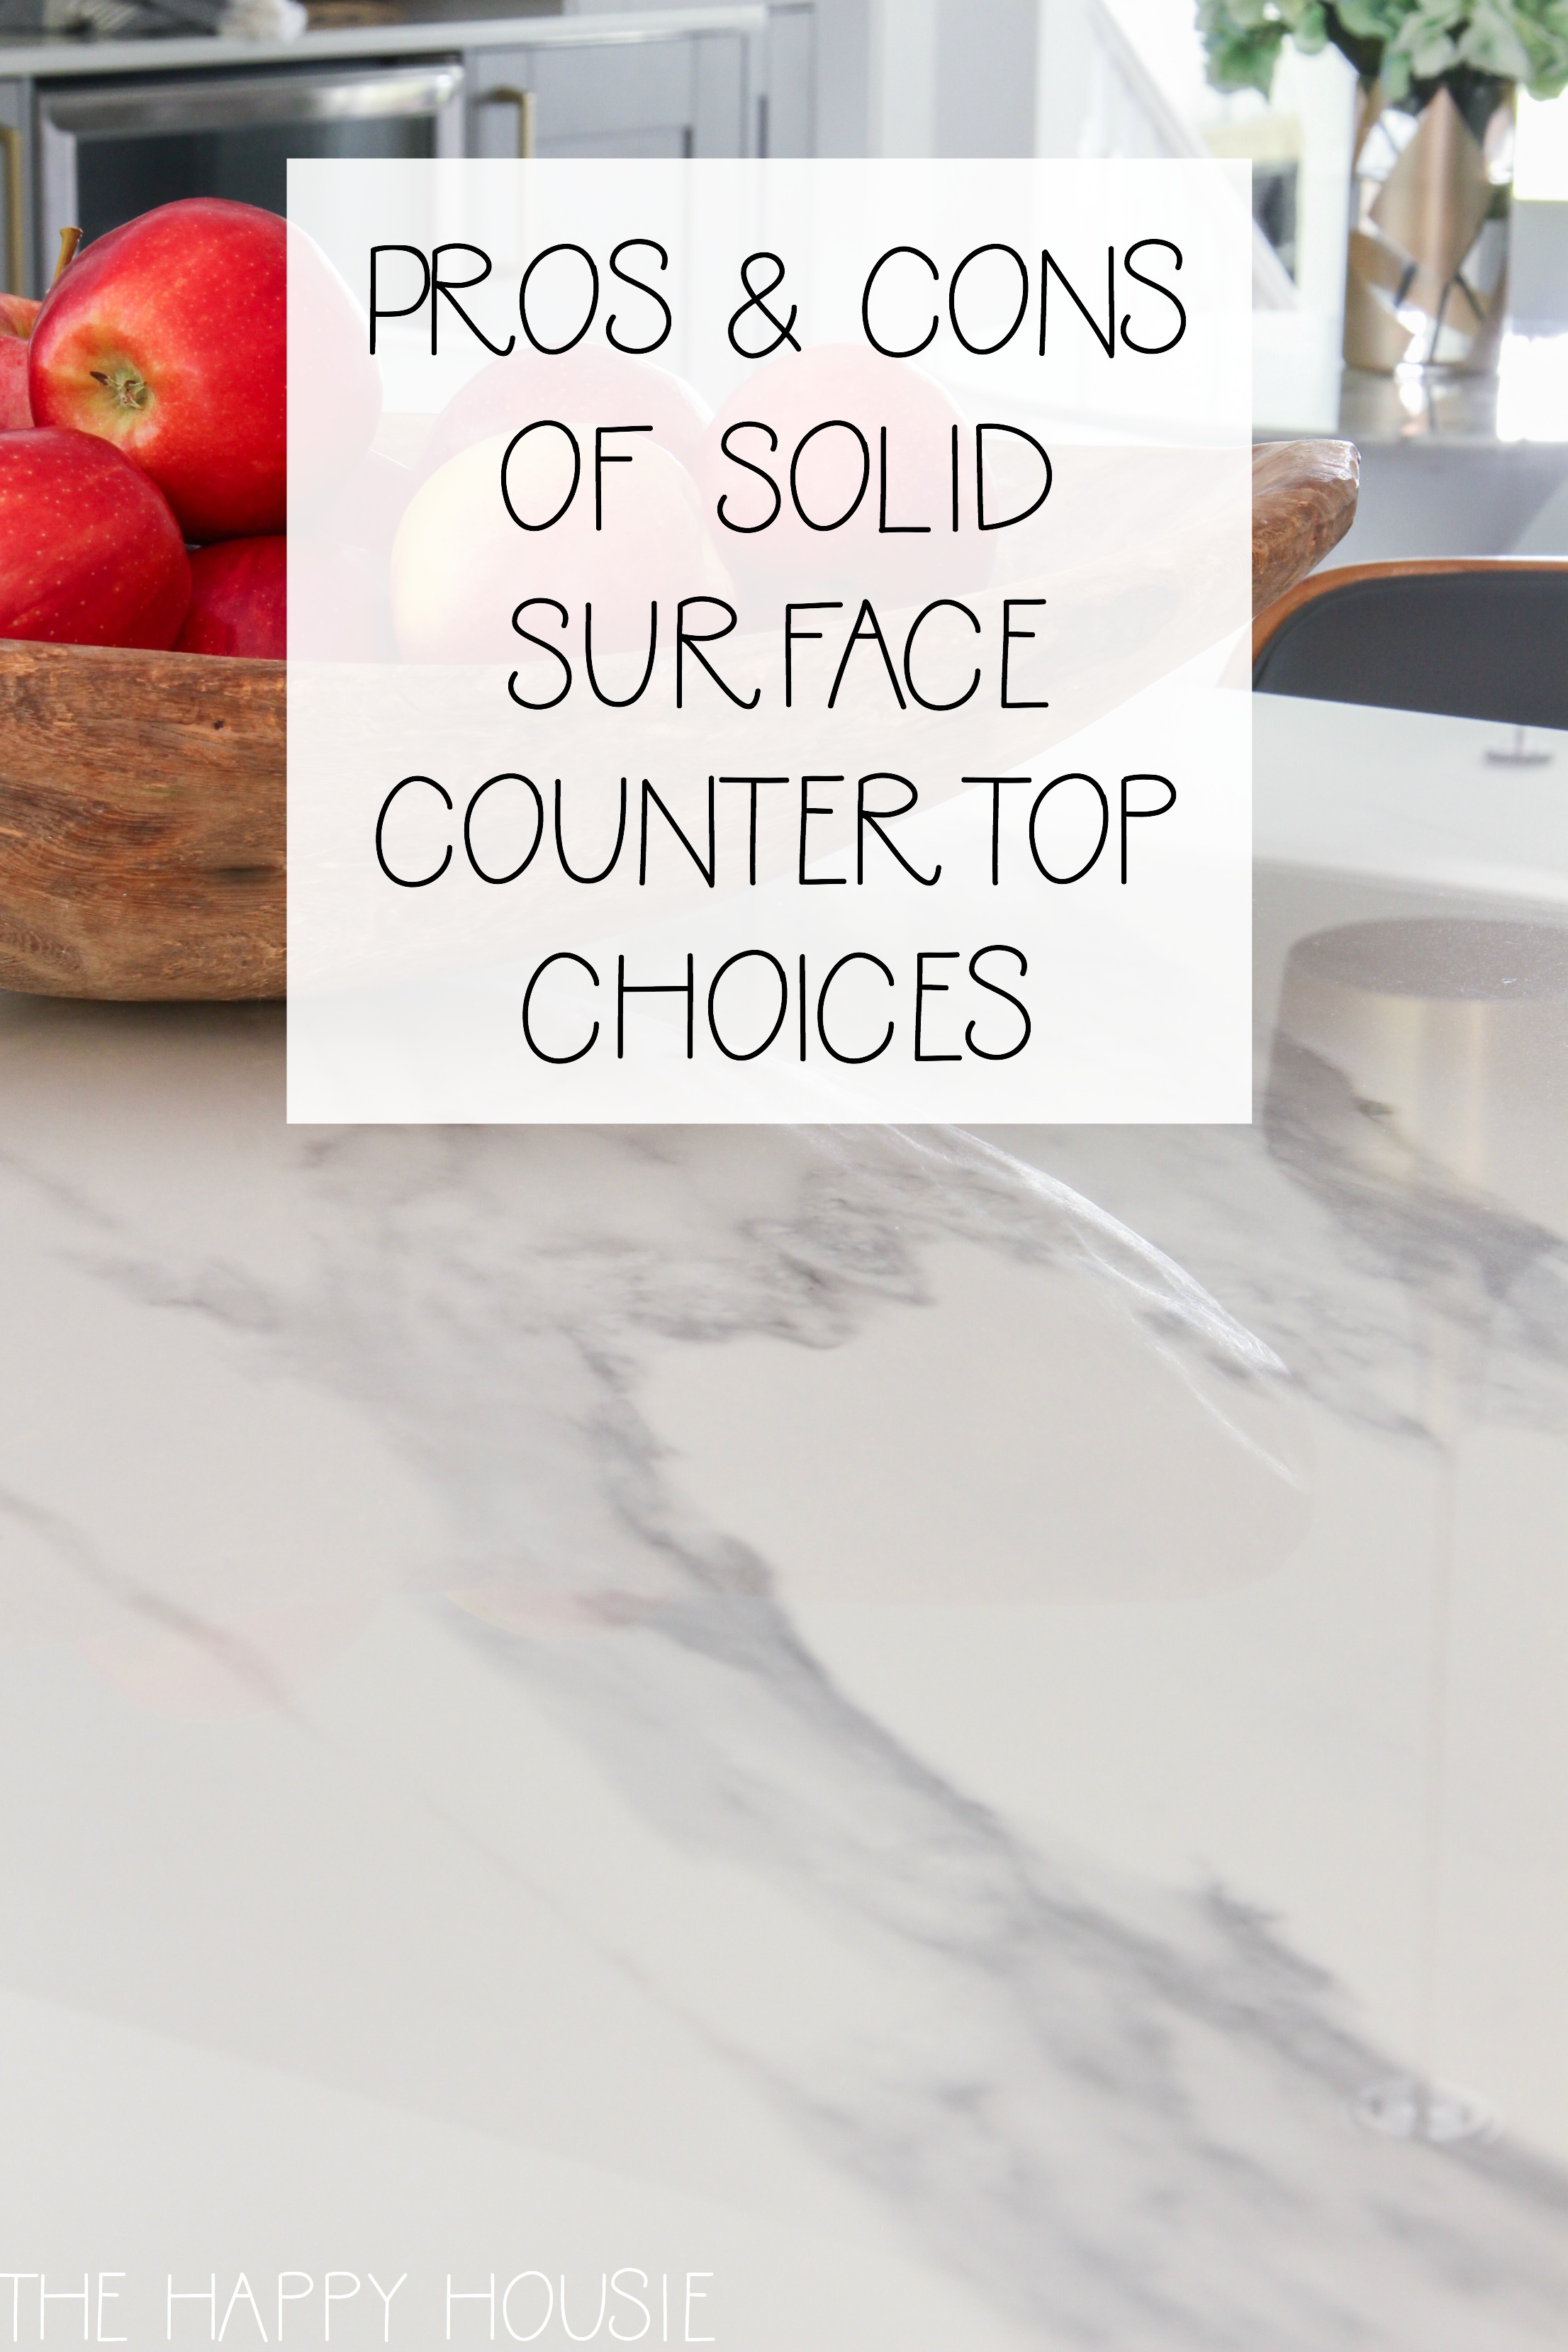 Pros and cons of solid surface counter top choices.